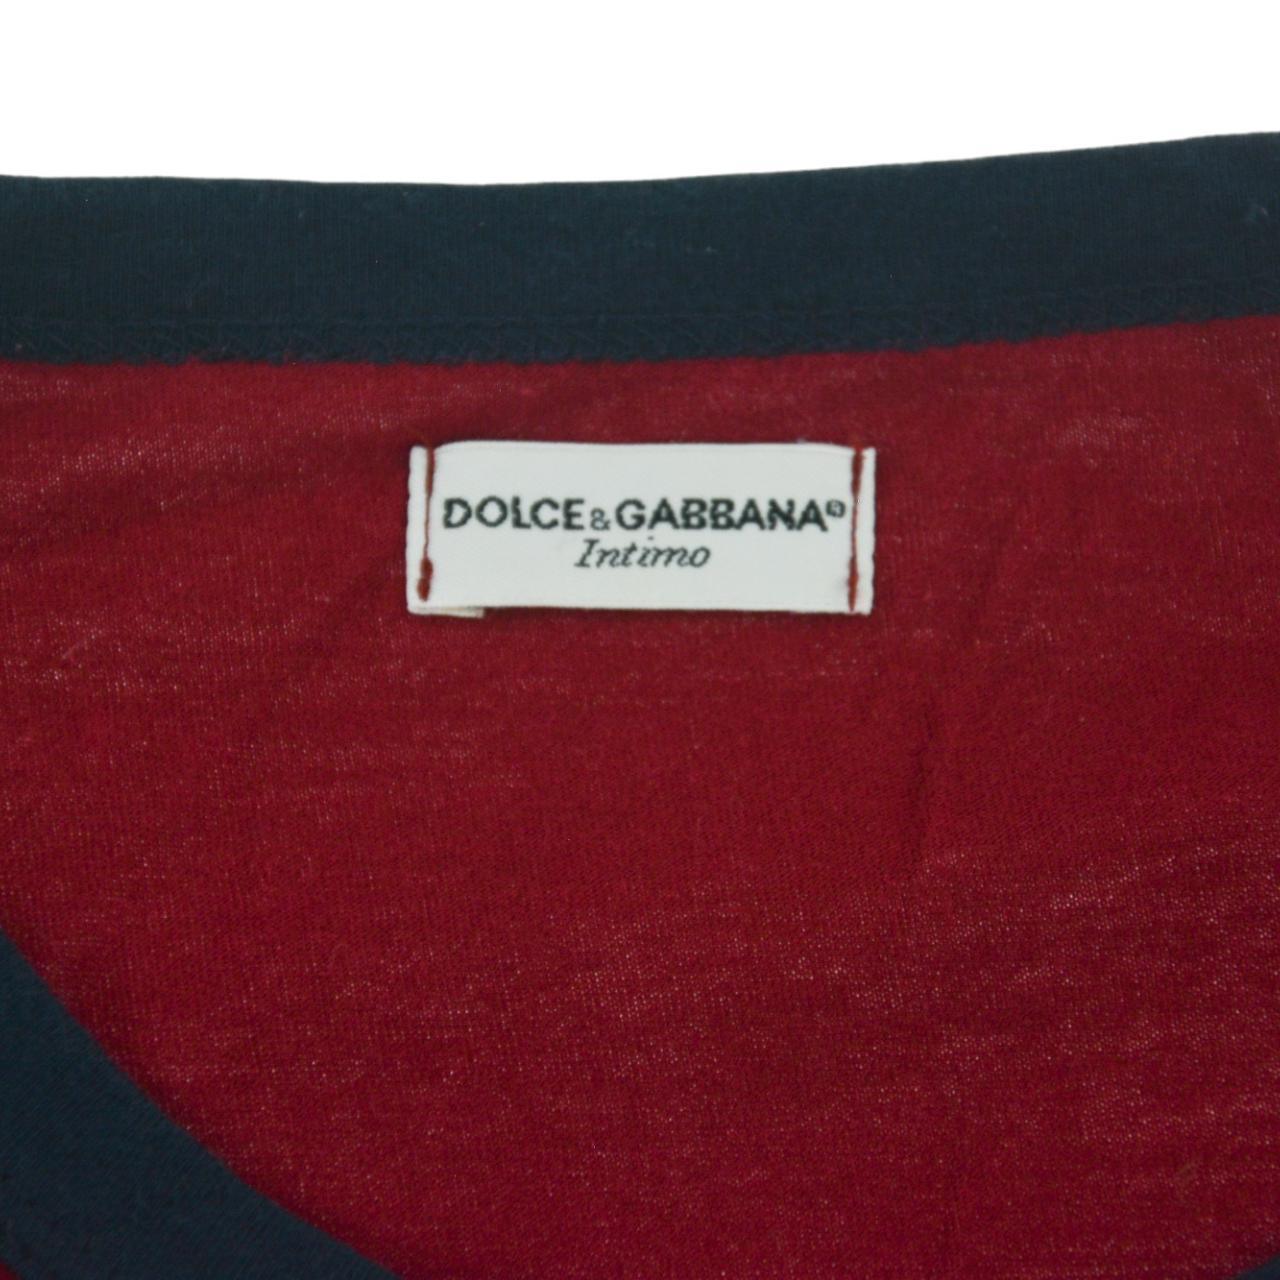 Vintage Dolce and Gabbana Long Sleeve T Shirt Size S - Known Source